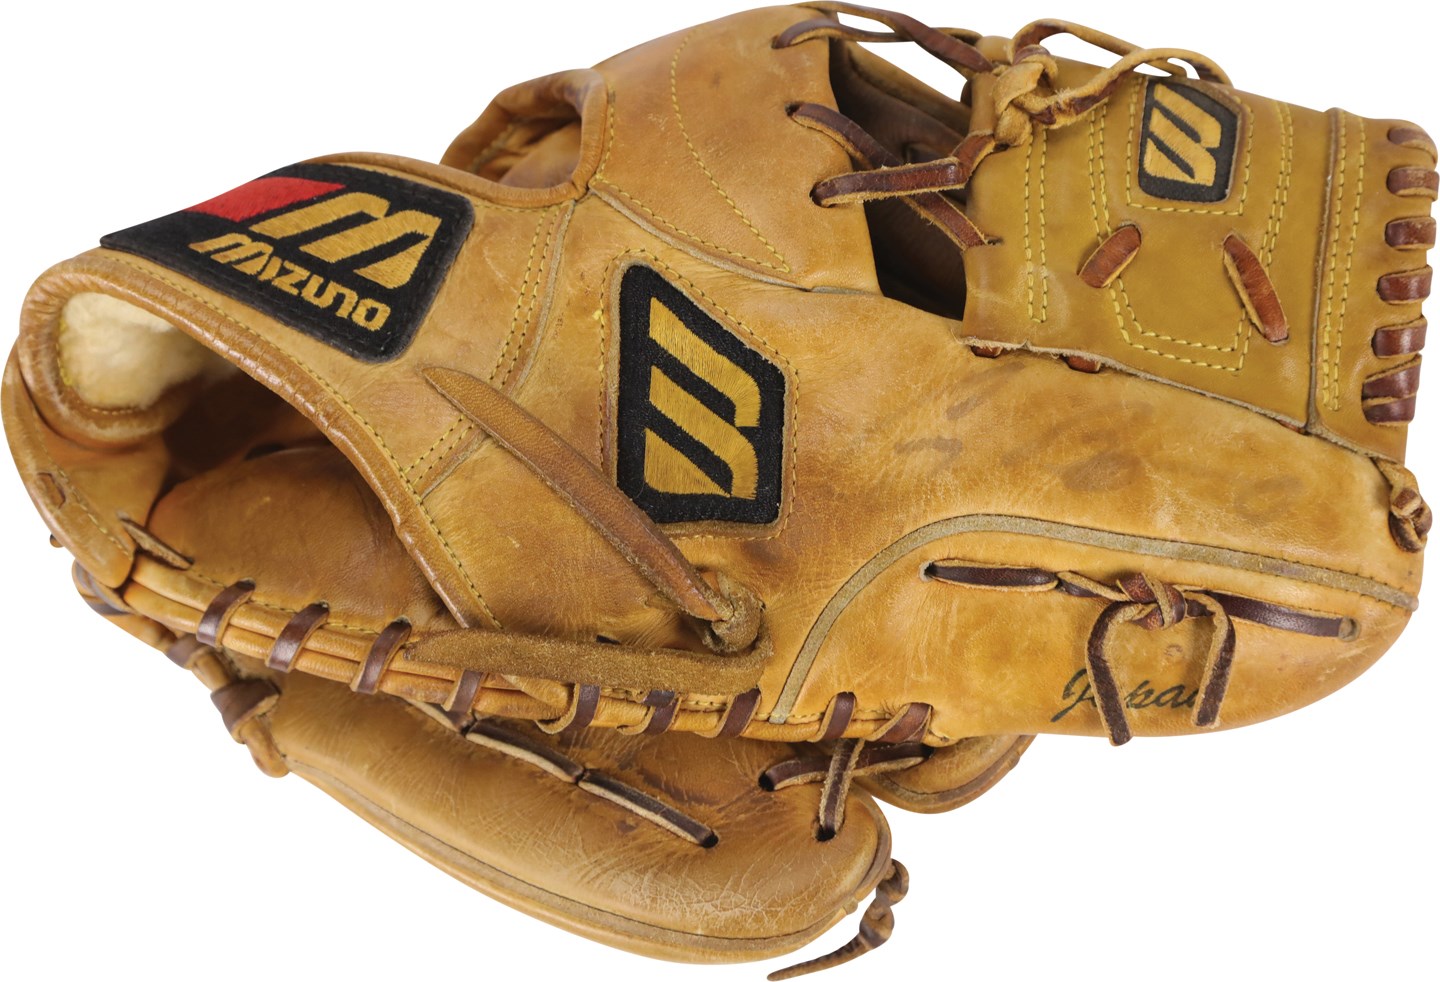 Baseball Equipment - 1993 Craig Biggio Photo-Matched Houston Astros Signed Game Used Glove - Matched to FIVE Images (PSA)